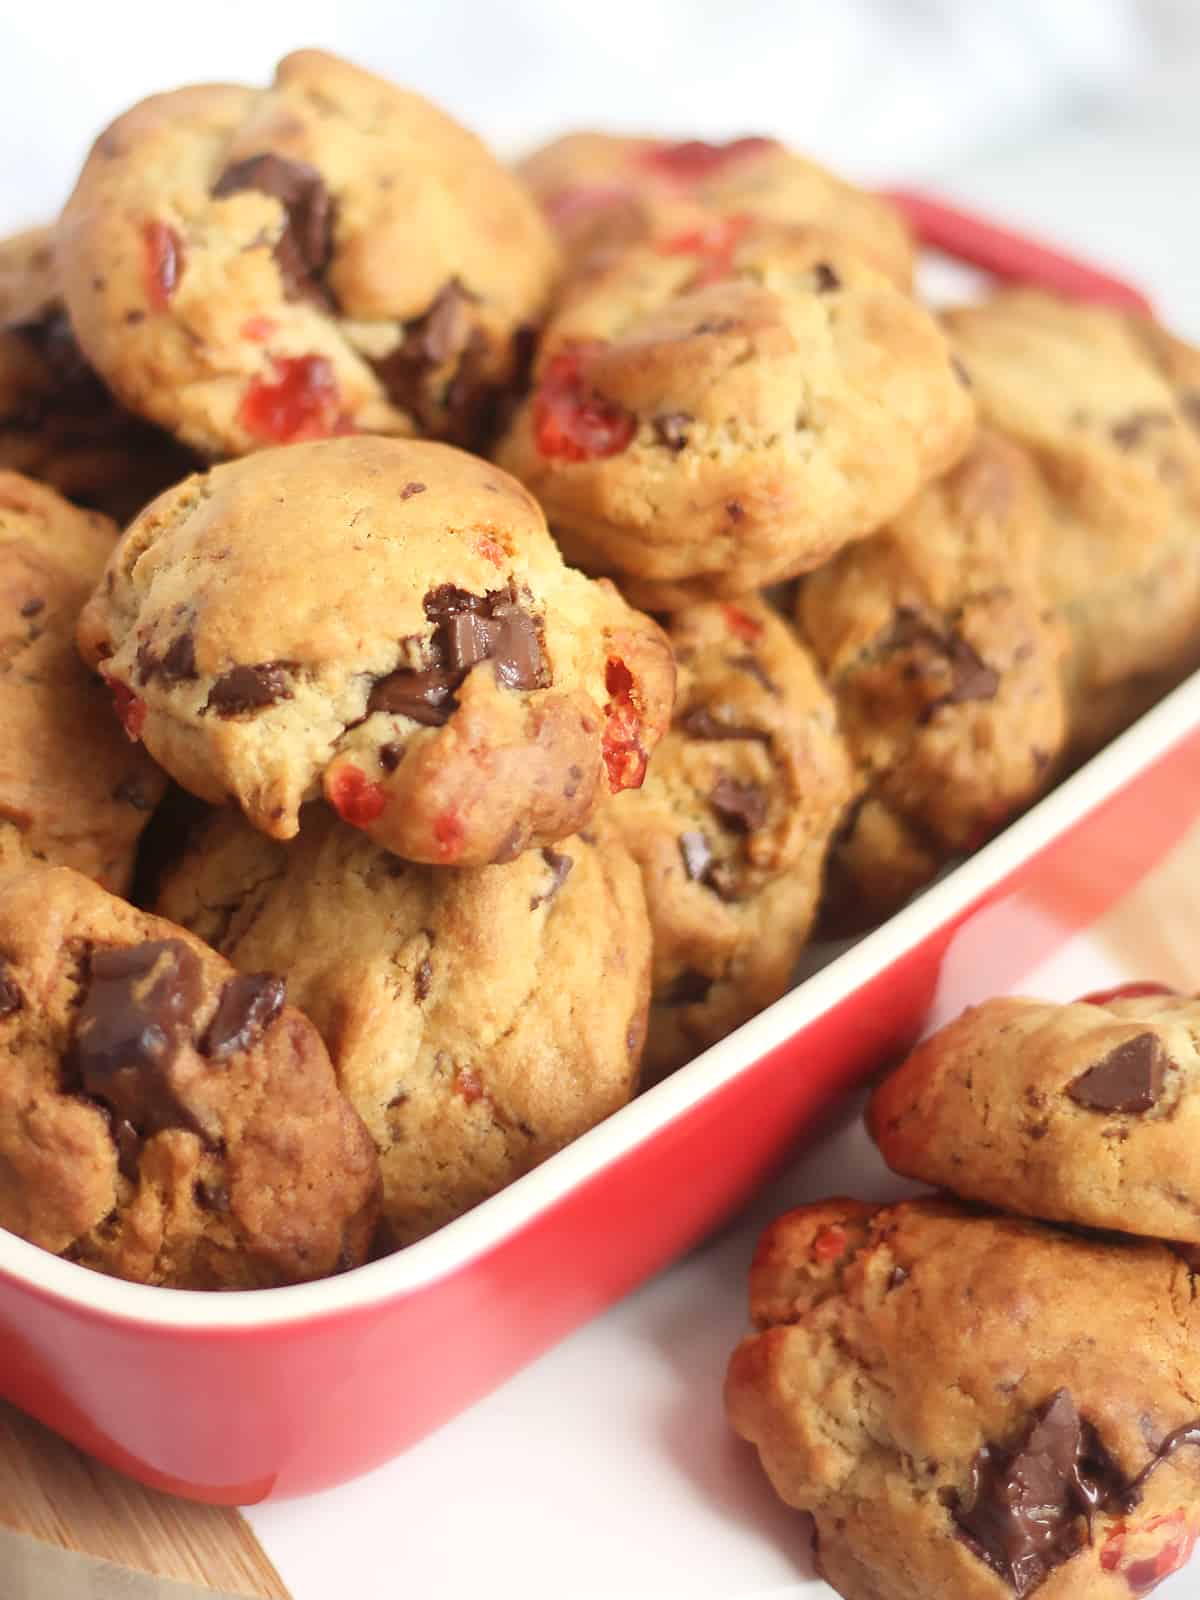 Cookies in a red serving dish.